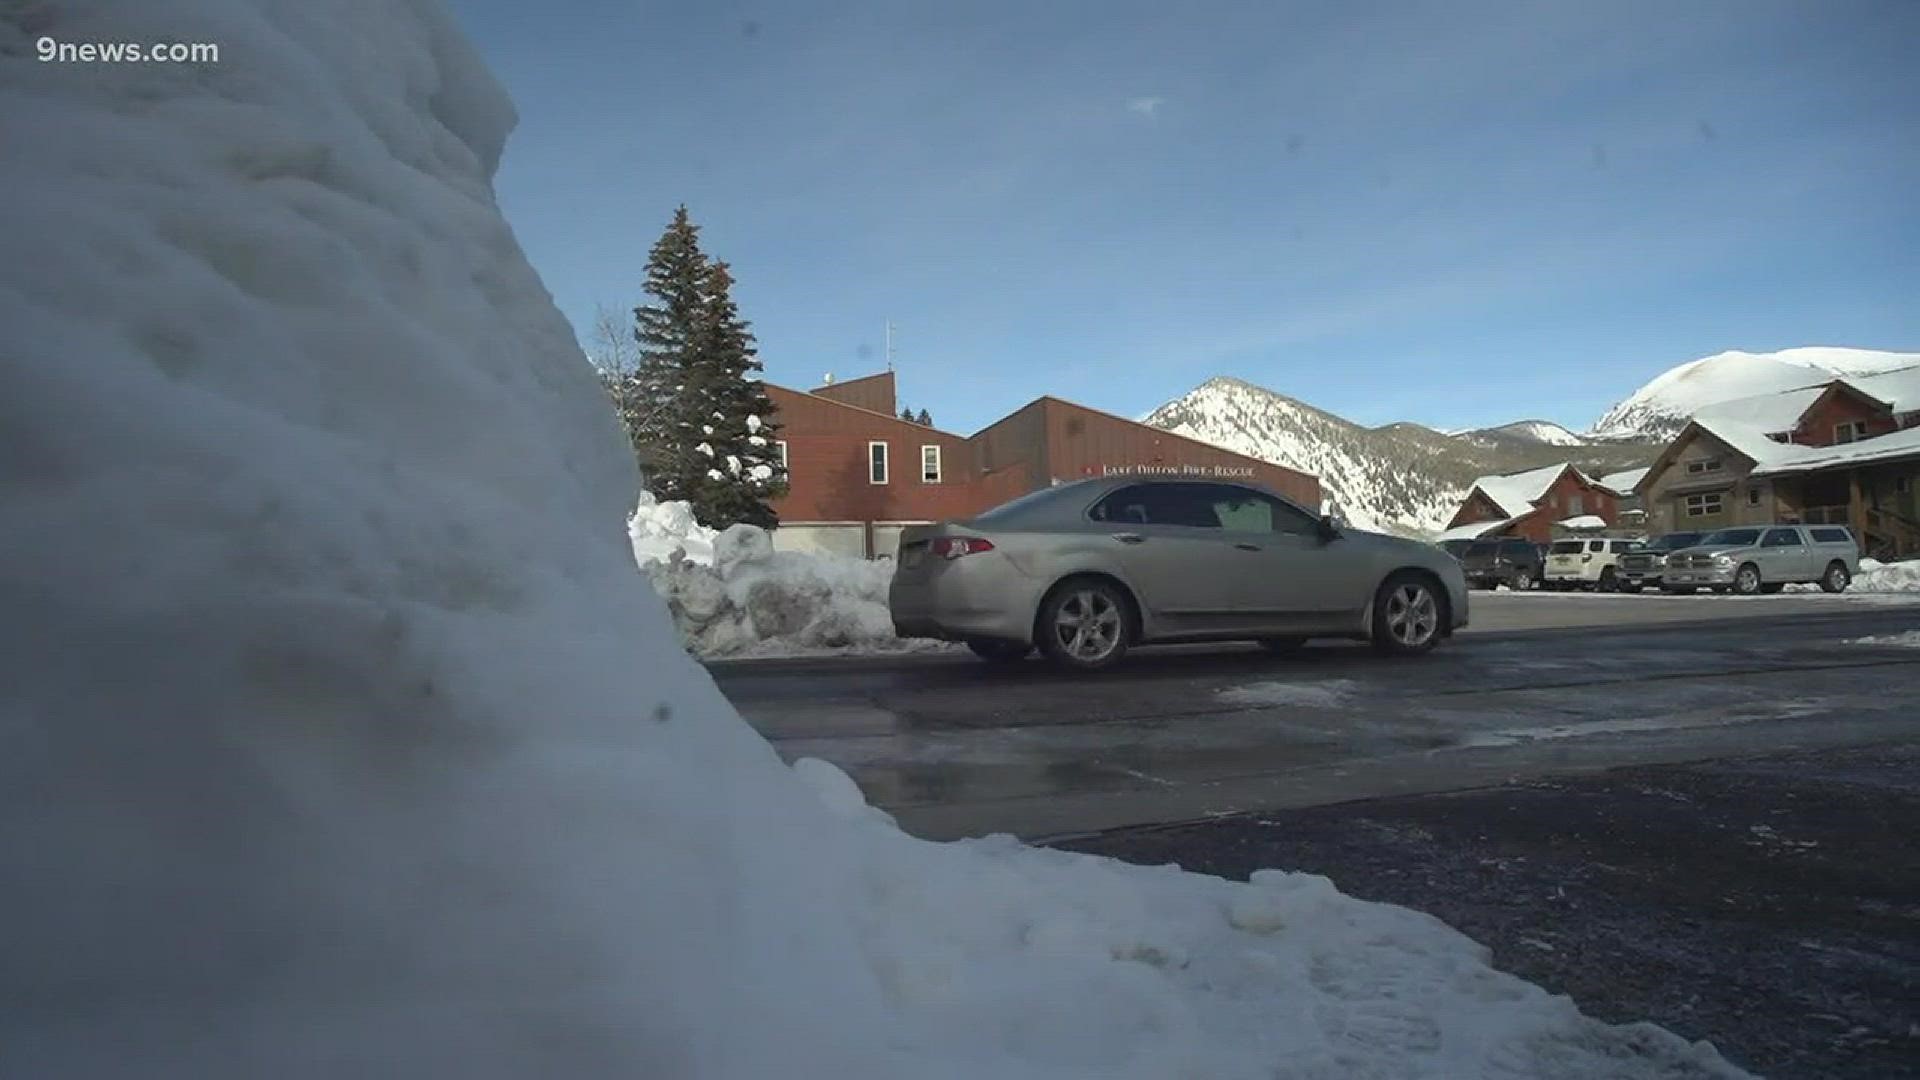 Firefighters want you to help them clear snow from around fire hydrants in Summit County.